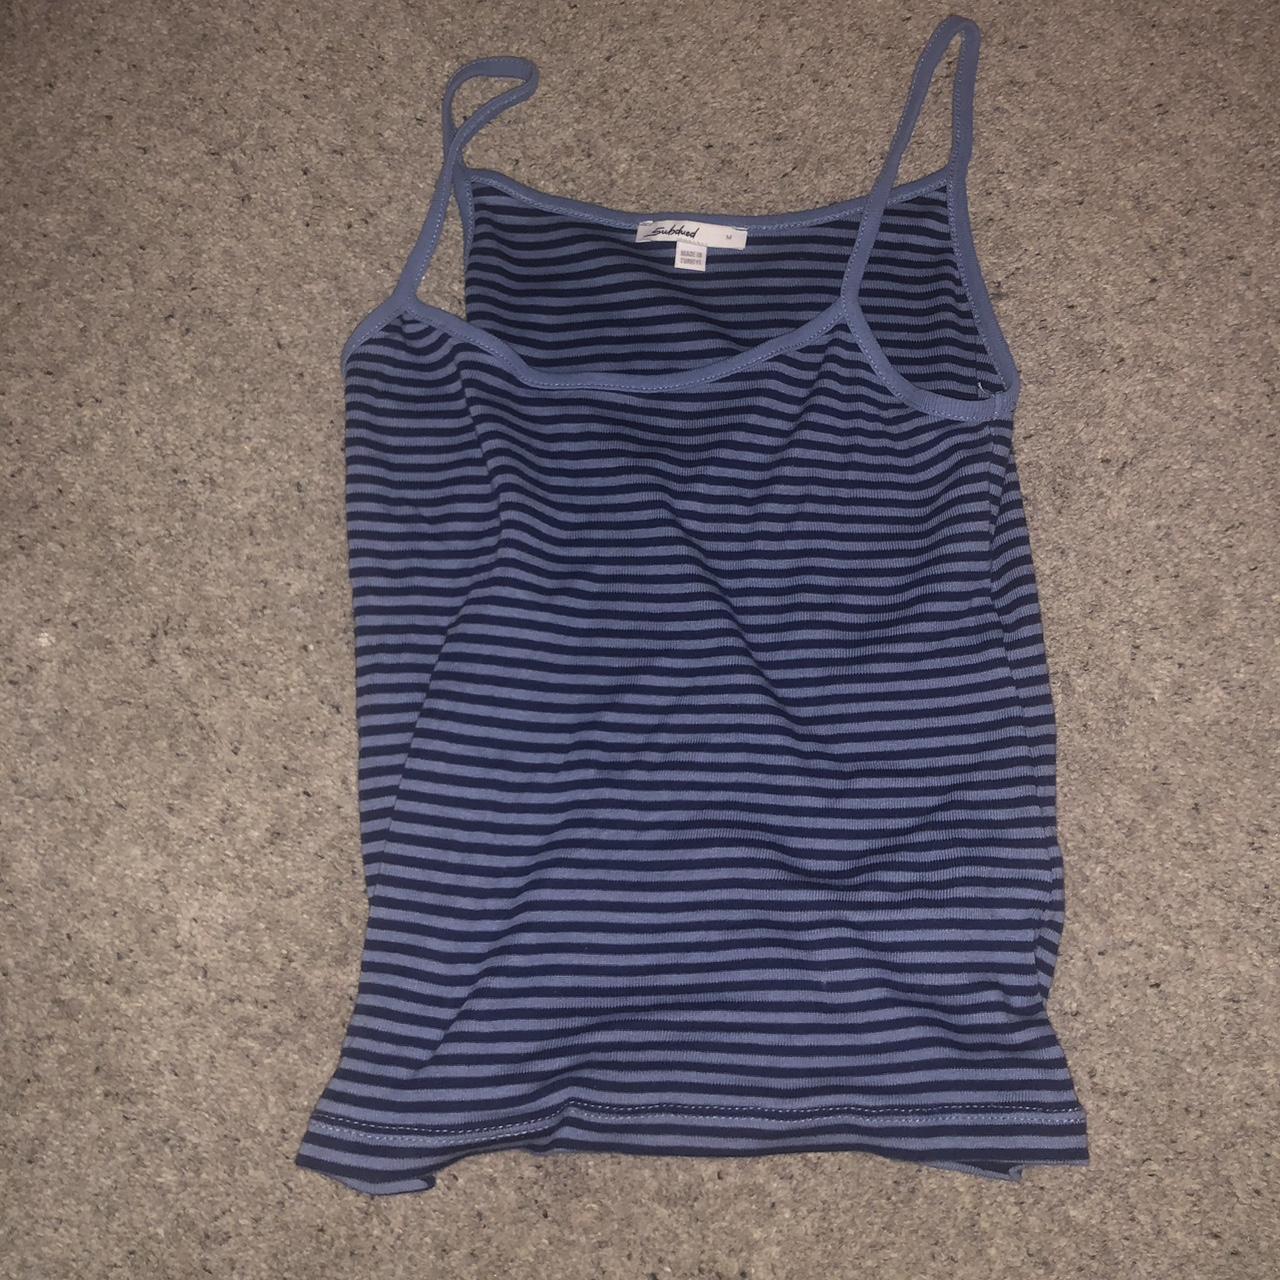 Subdued Women's Navy and Blue Top | Depop